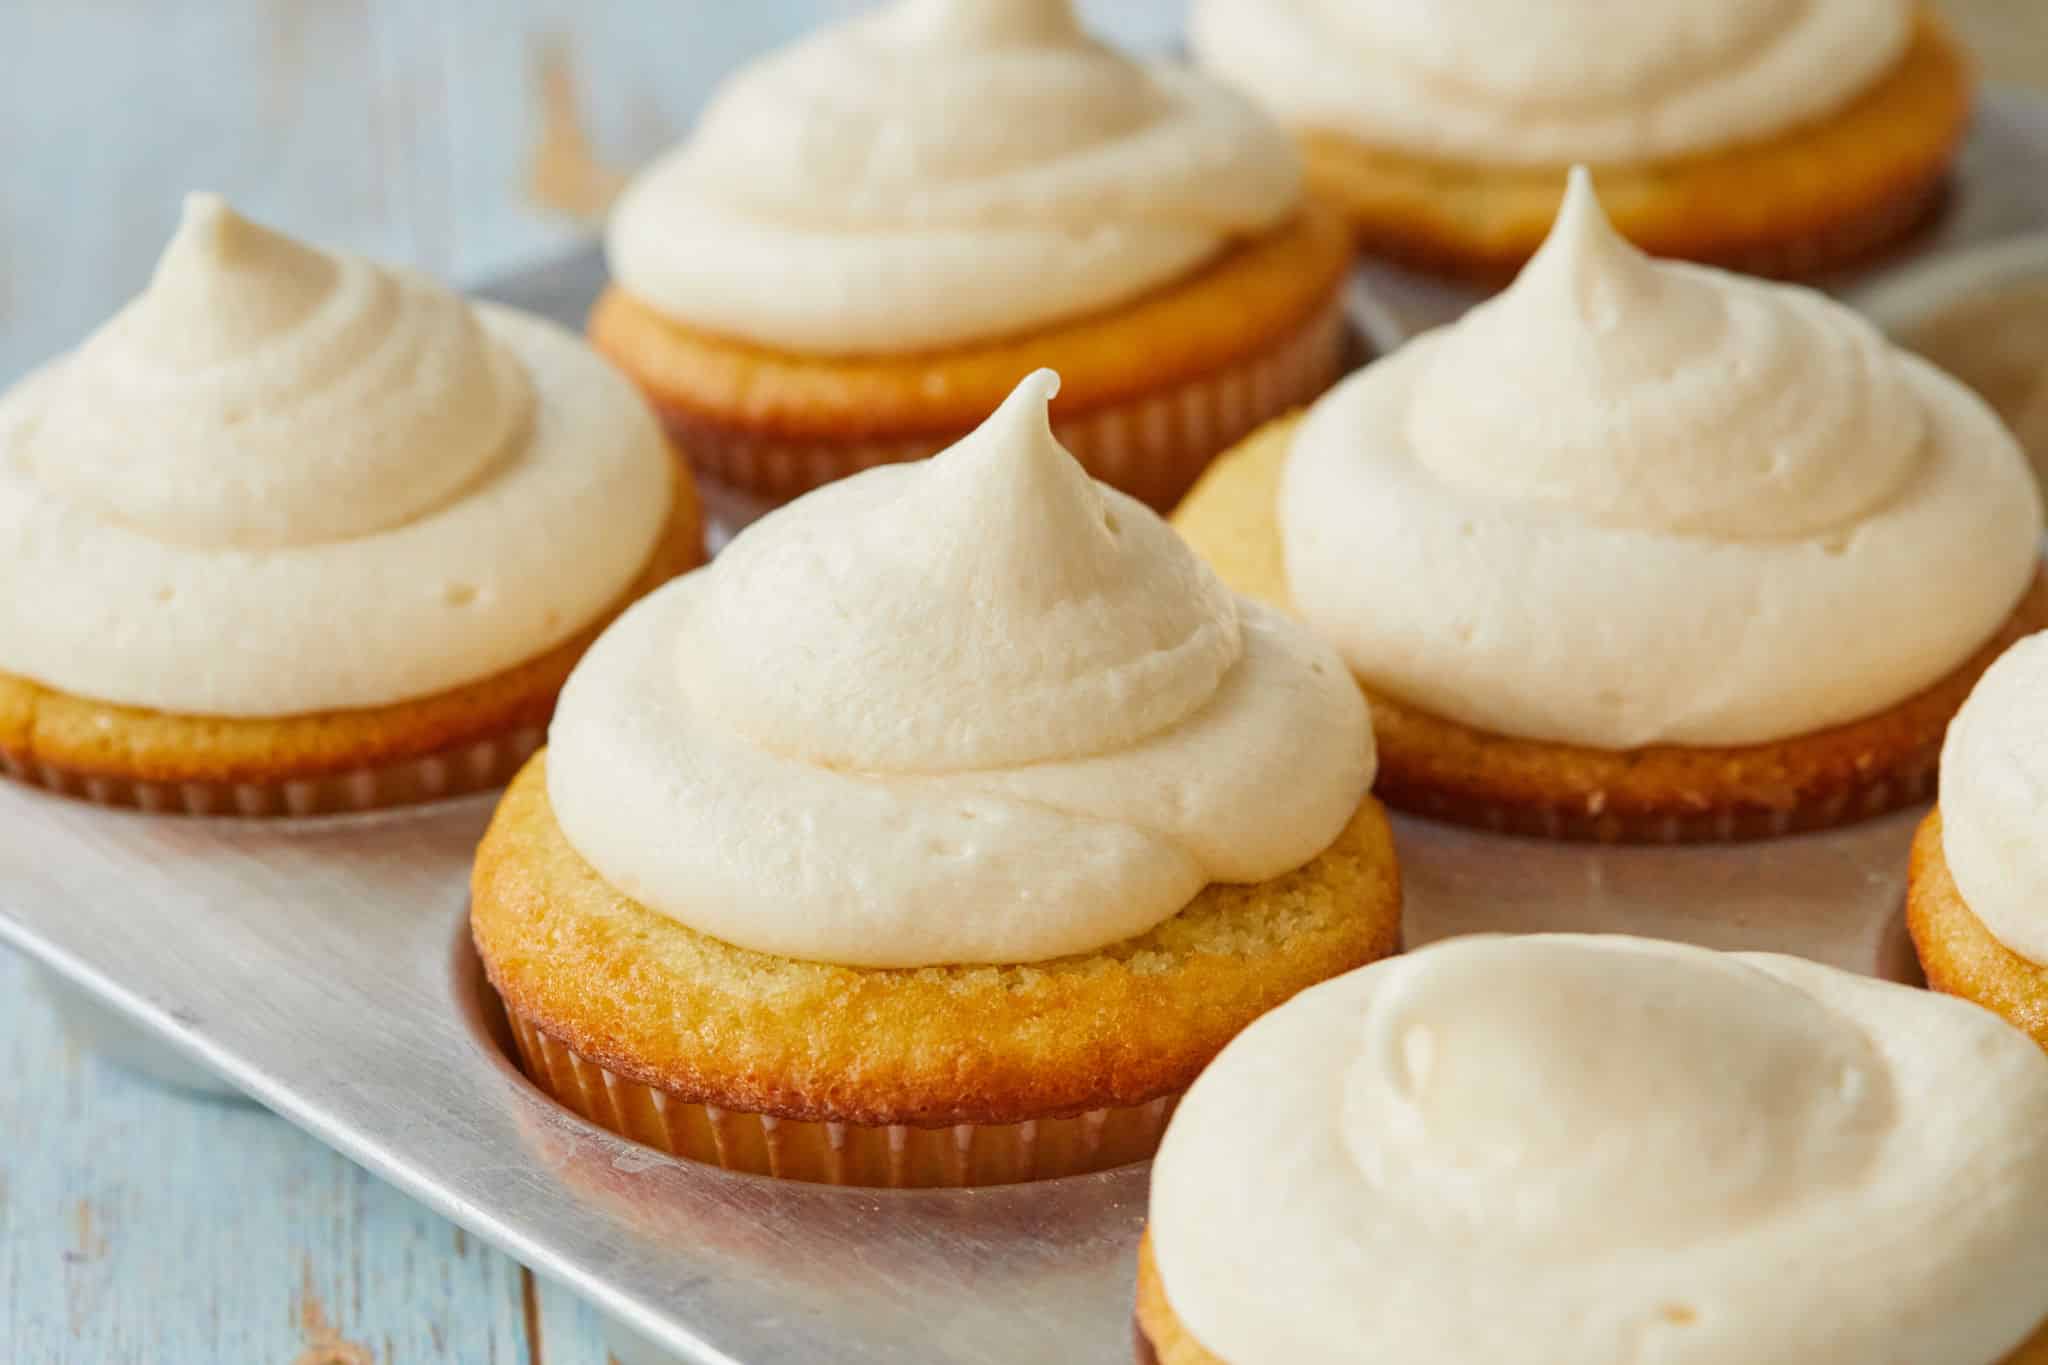 Cupcakes Topped With Vanilla Dairy-Free Buttercream Frosting